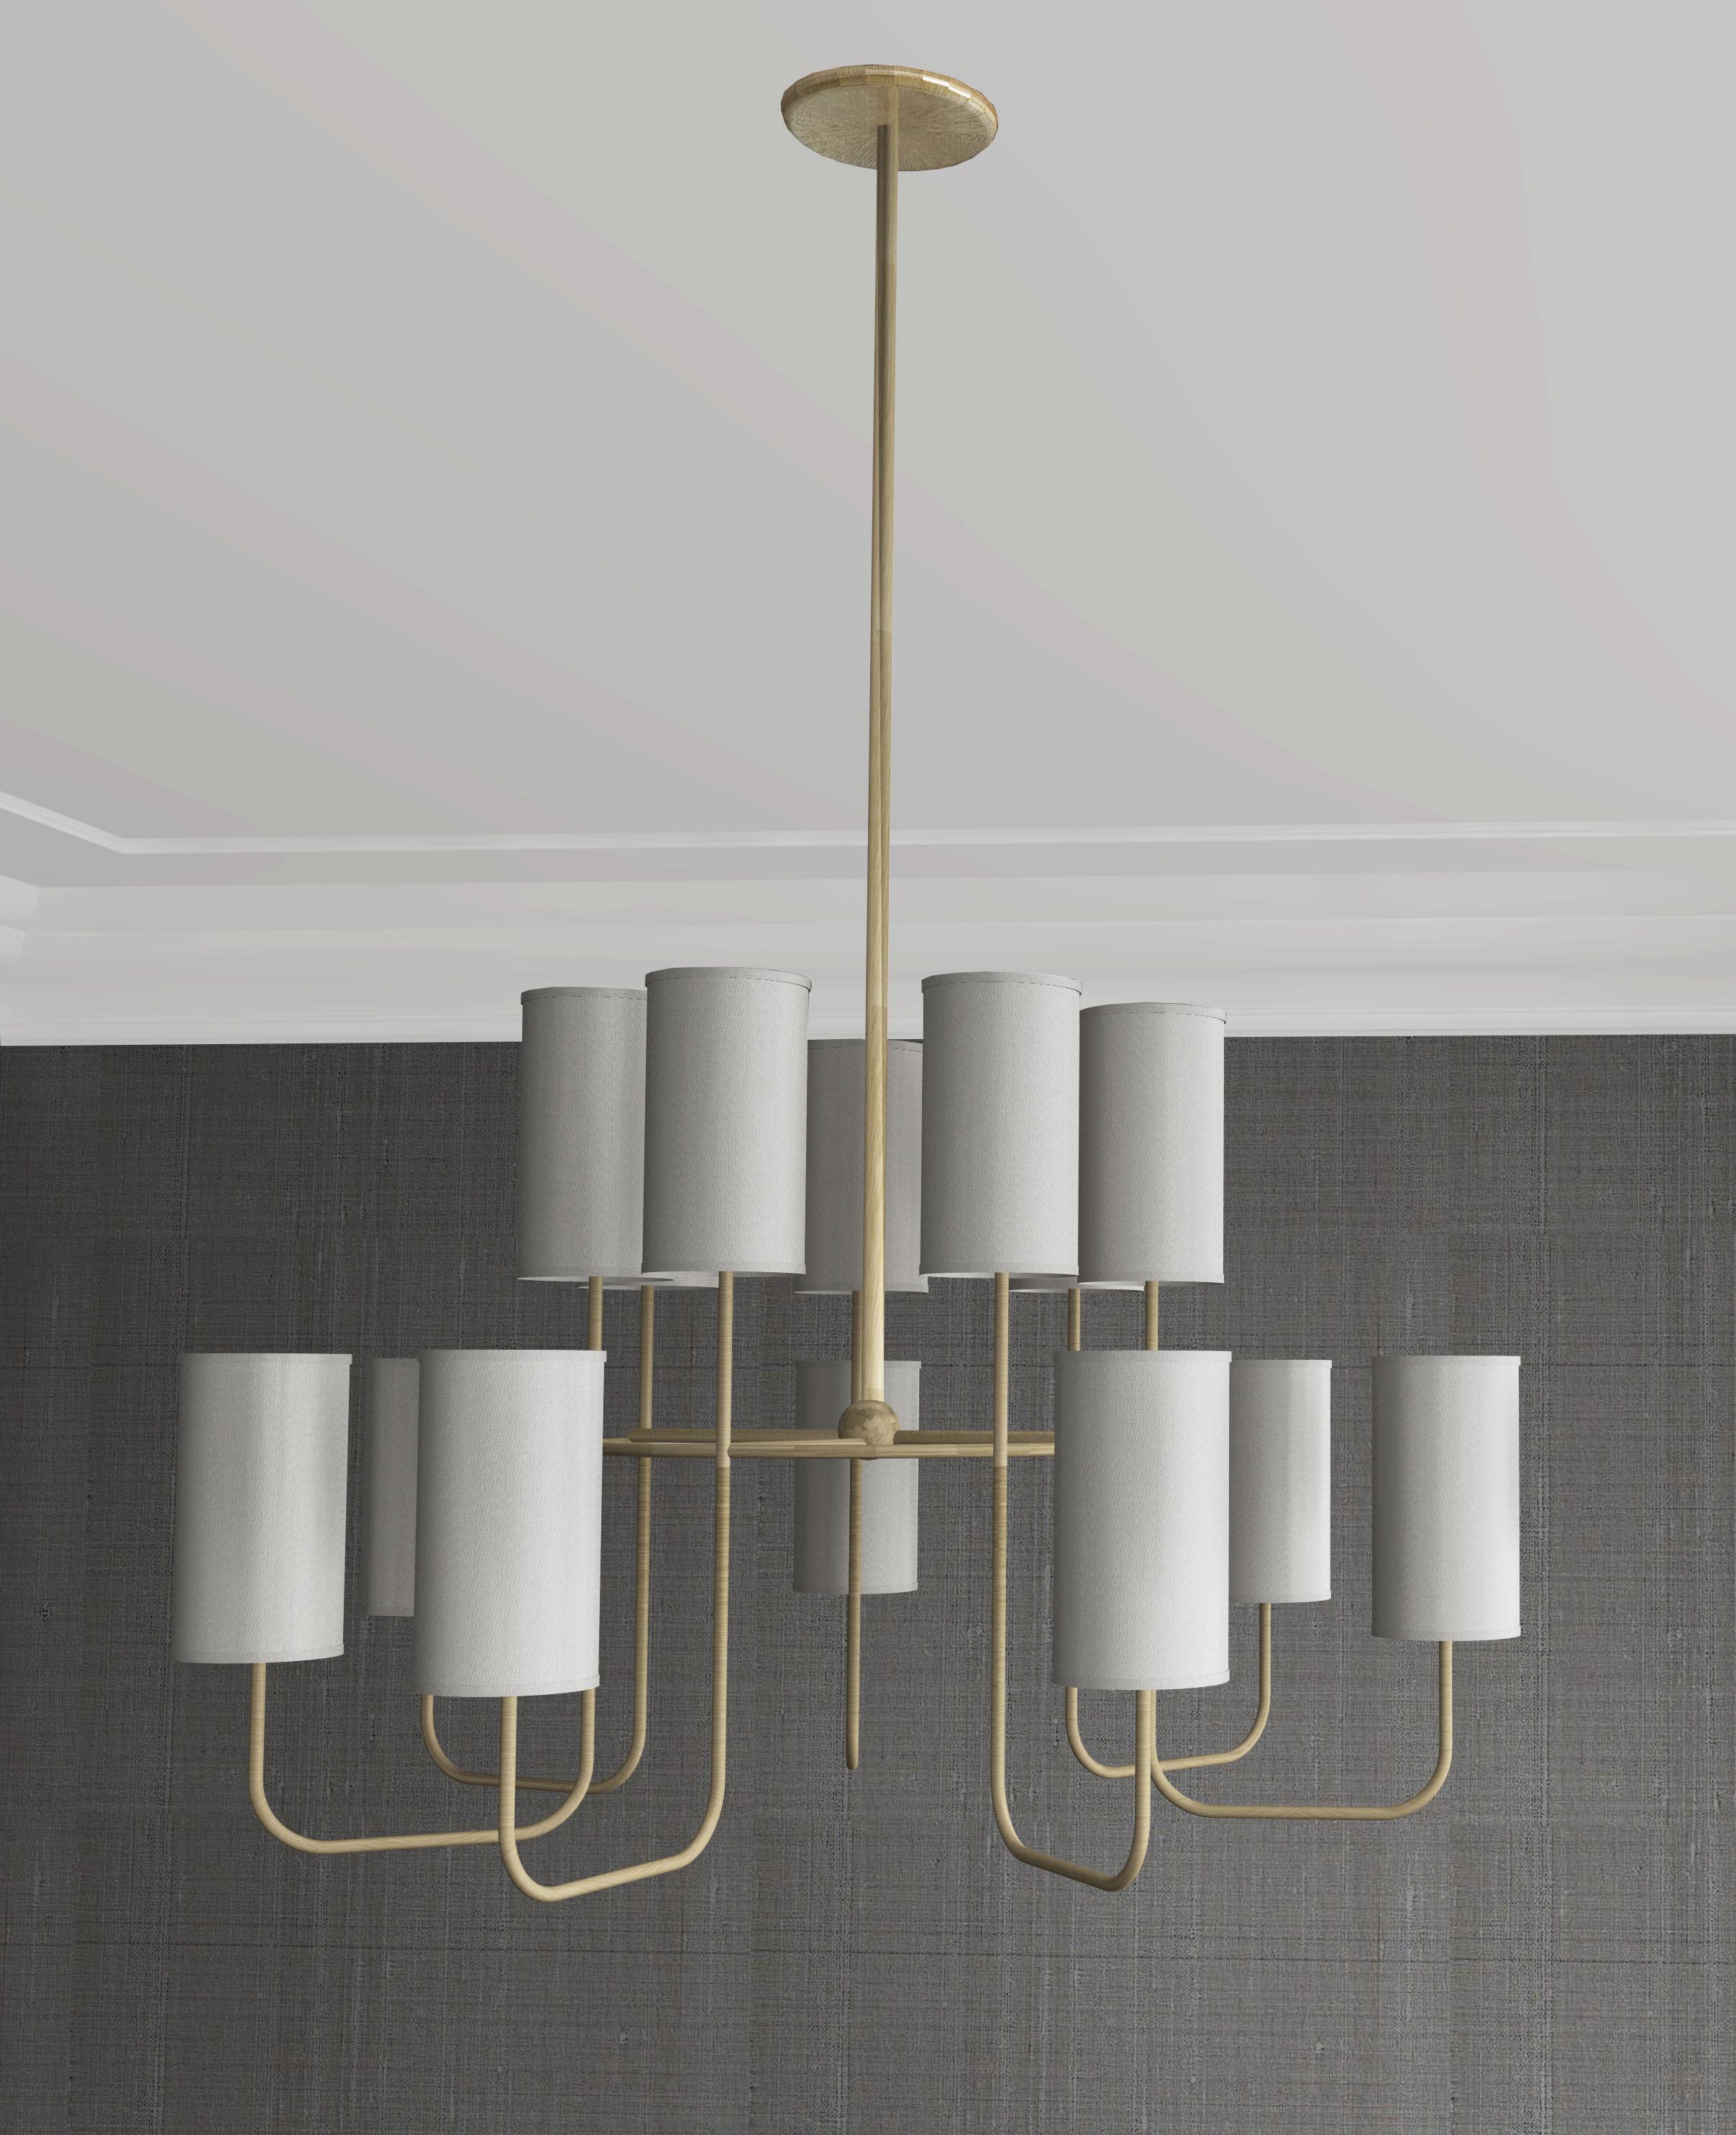 This chandelier is a modern take on tradition. Beautifully crafted with elegant materials including brushed brass and sateen shades. The tall, timeless shades add a modern touch to the classic motif base, giving a familiar, yet forward looking